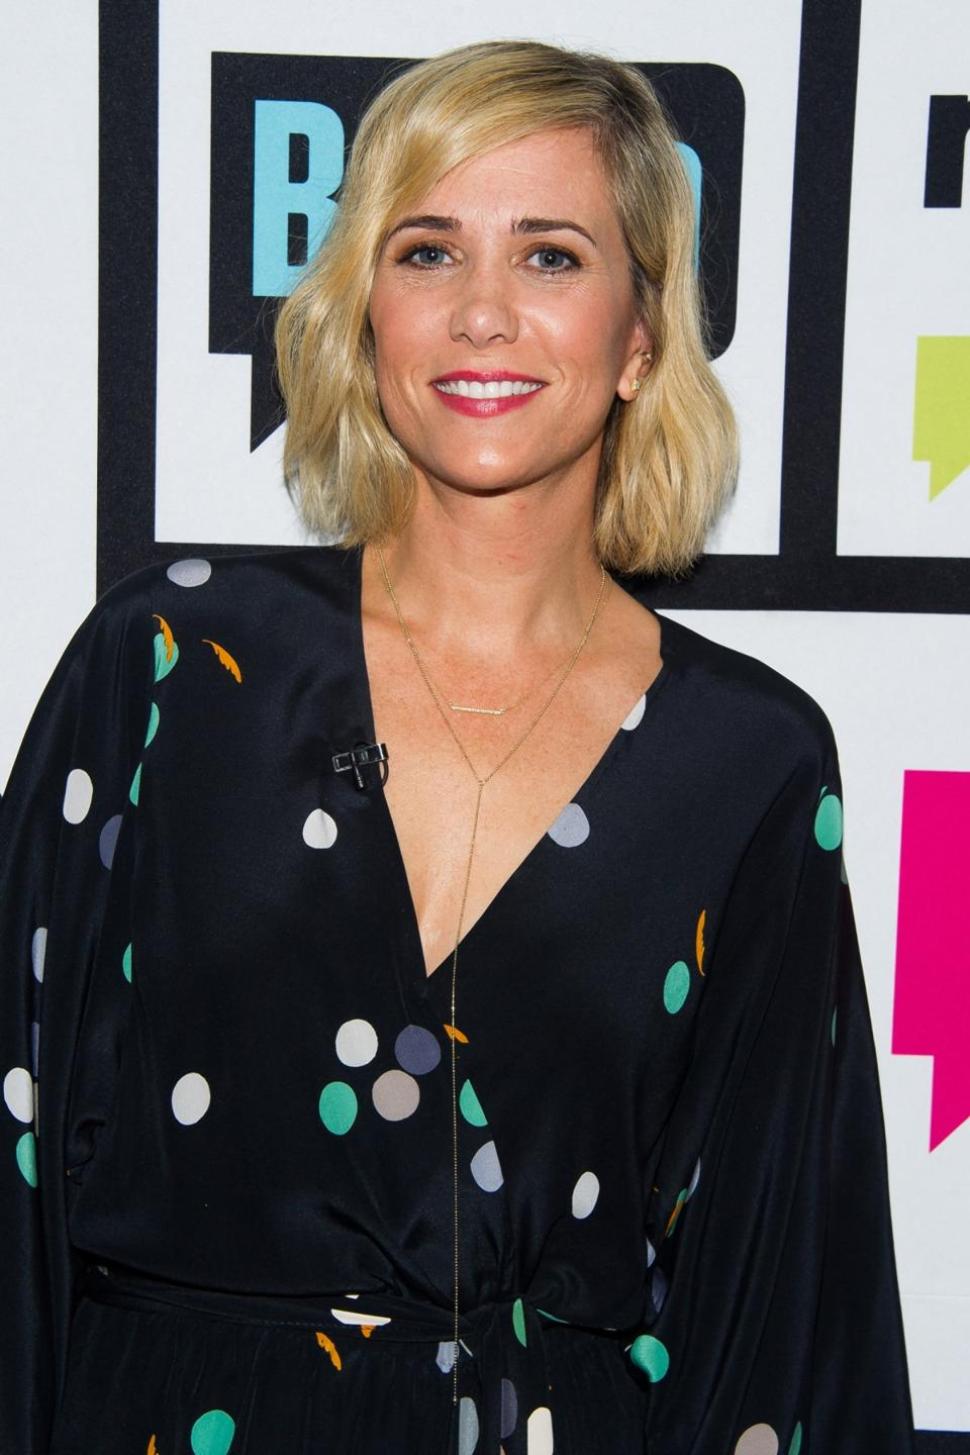 Kristen Wiig’s on the new all-woman ‘Ghostbusters’ squad.